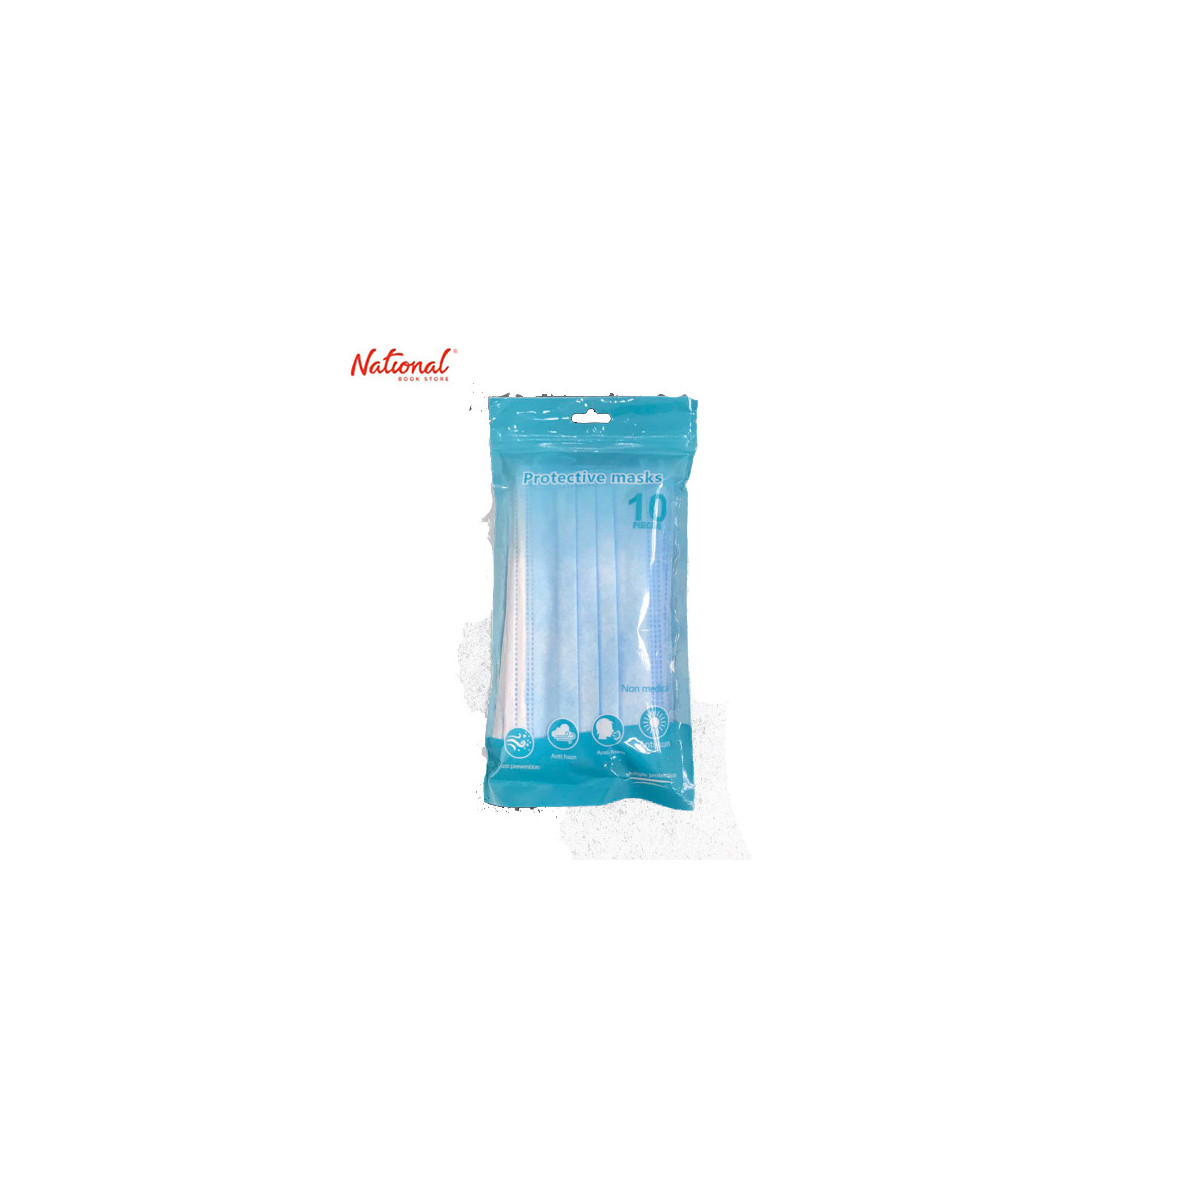 FACE MASK SURGICAL 3-PLY DISPOSABLE 10PCS/PACK